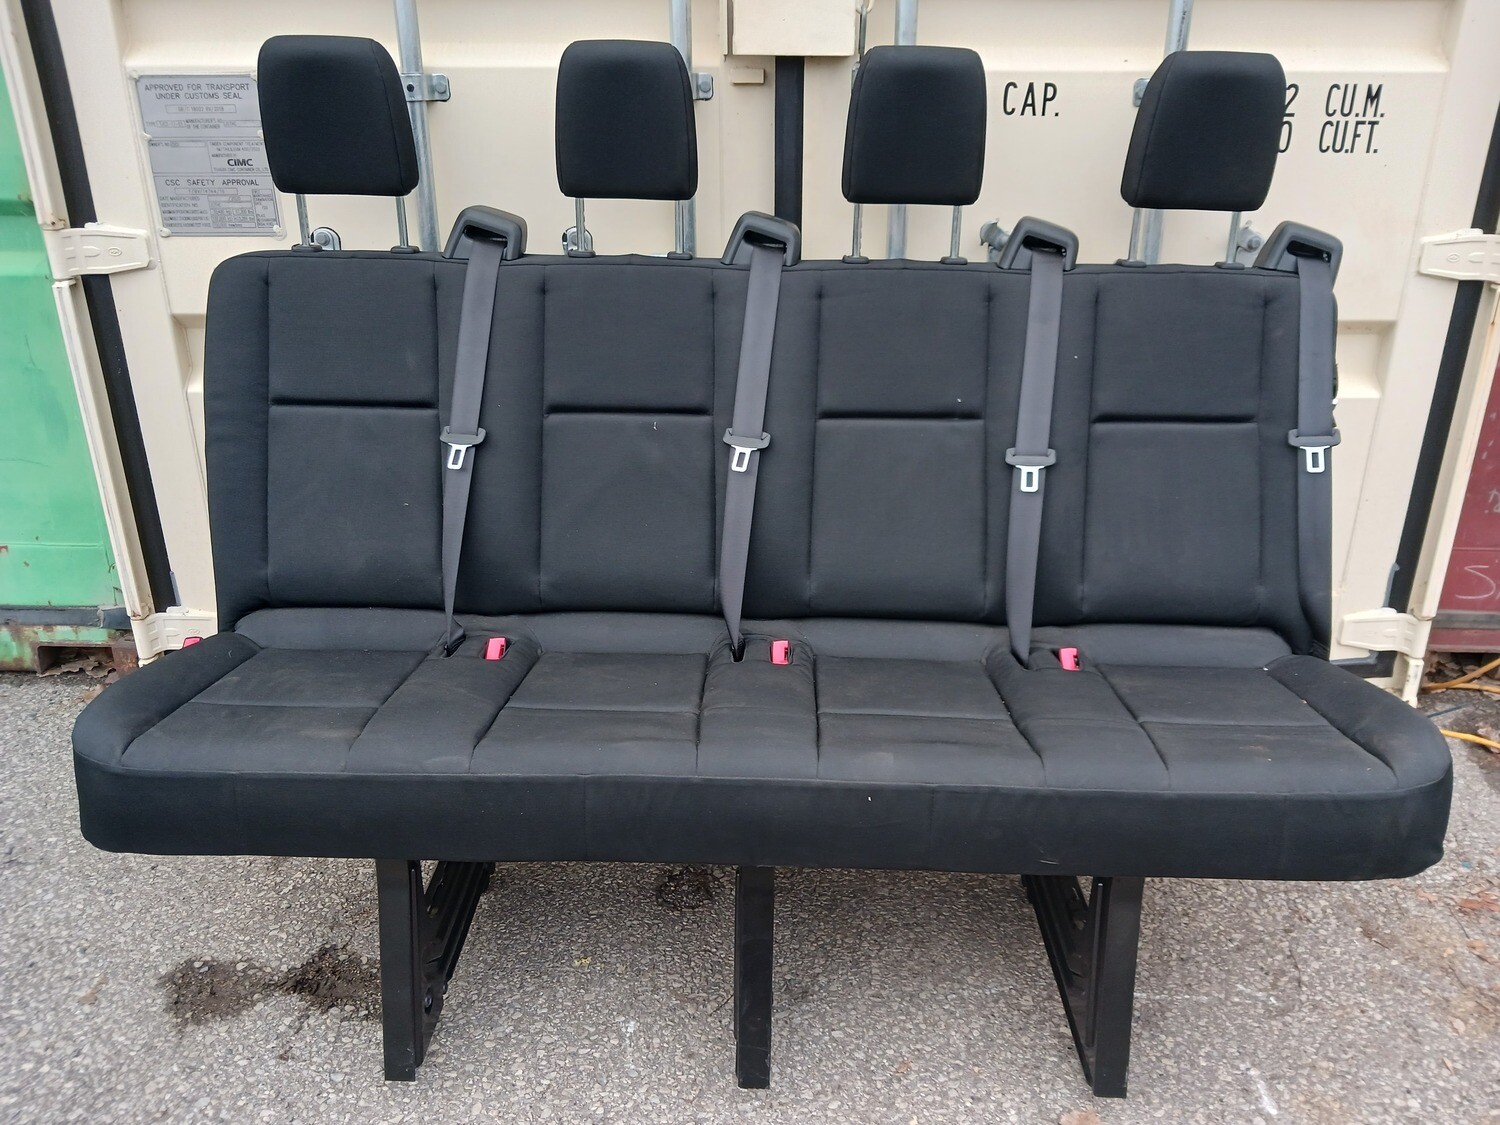 Four Passenger Bench Seat. Removable